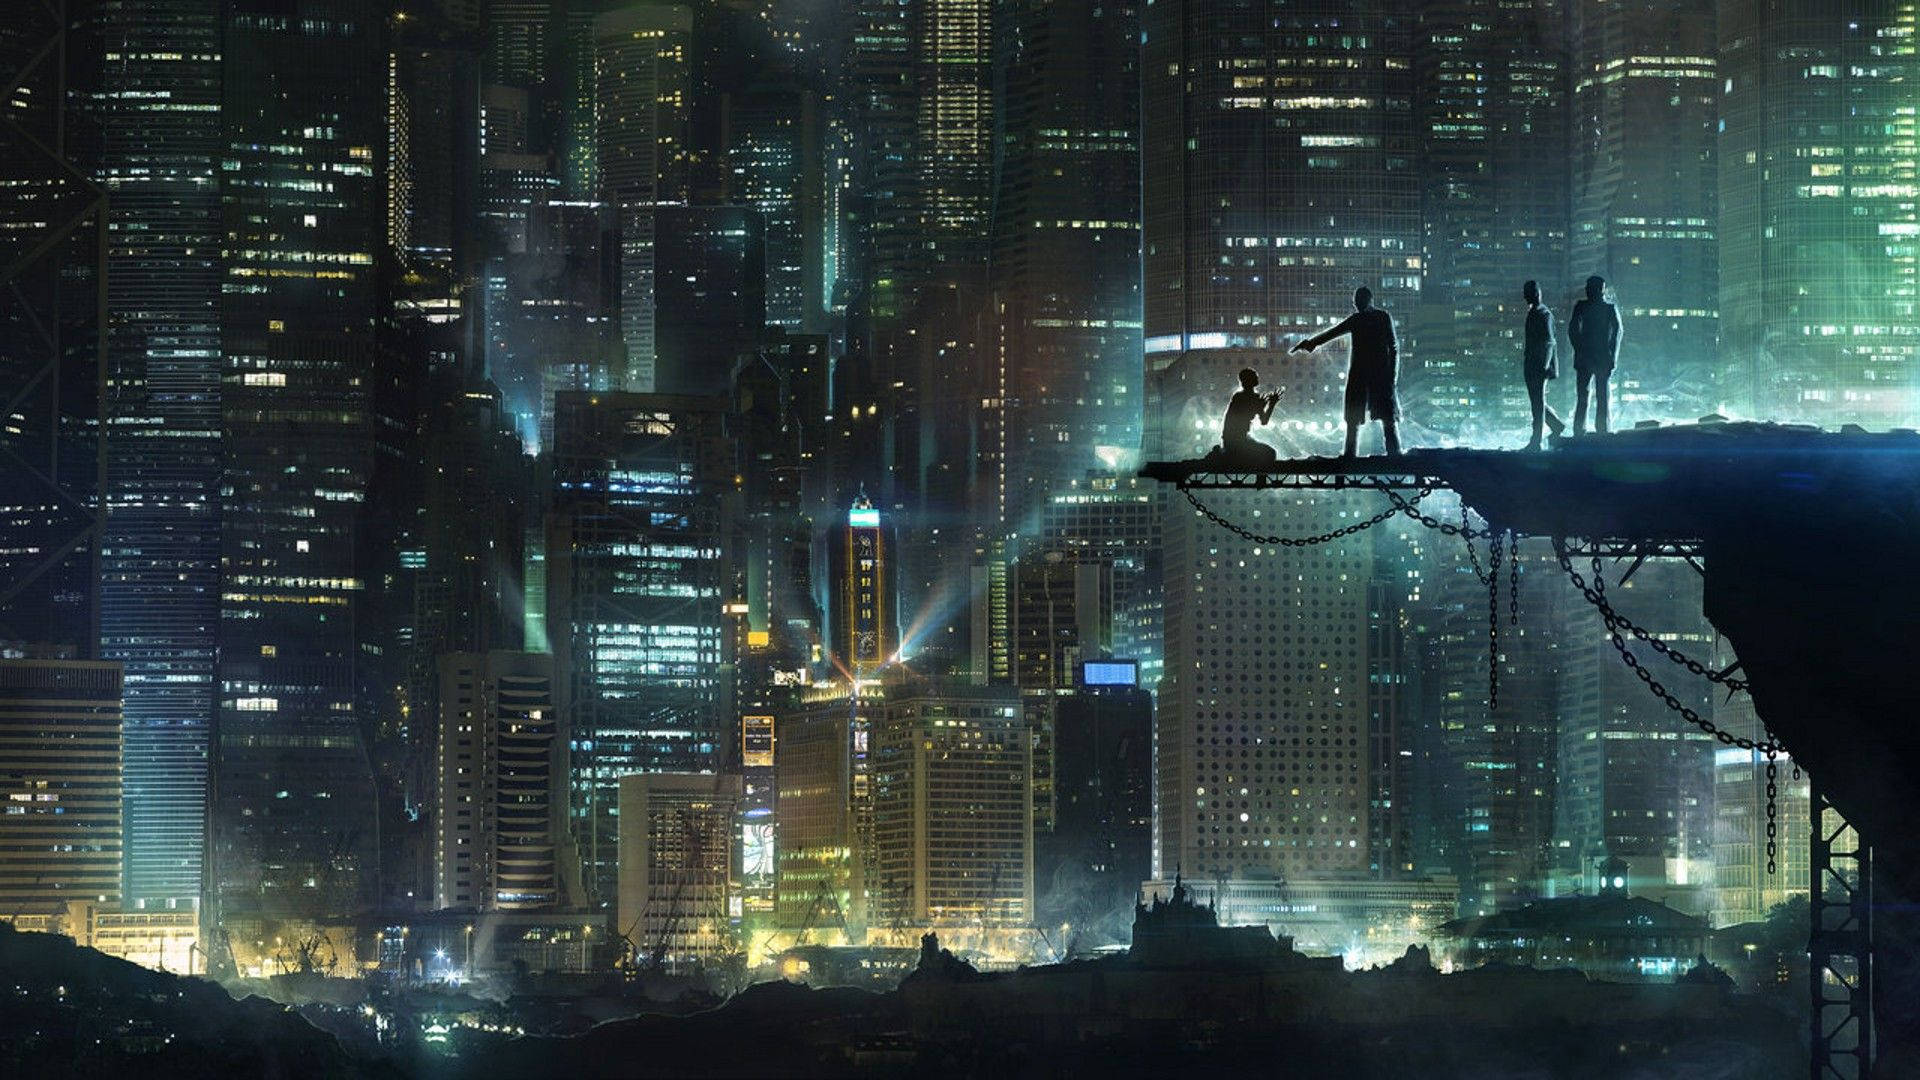 "Reality is Constrained in a Cyberpunk Future" Wallpaper